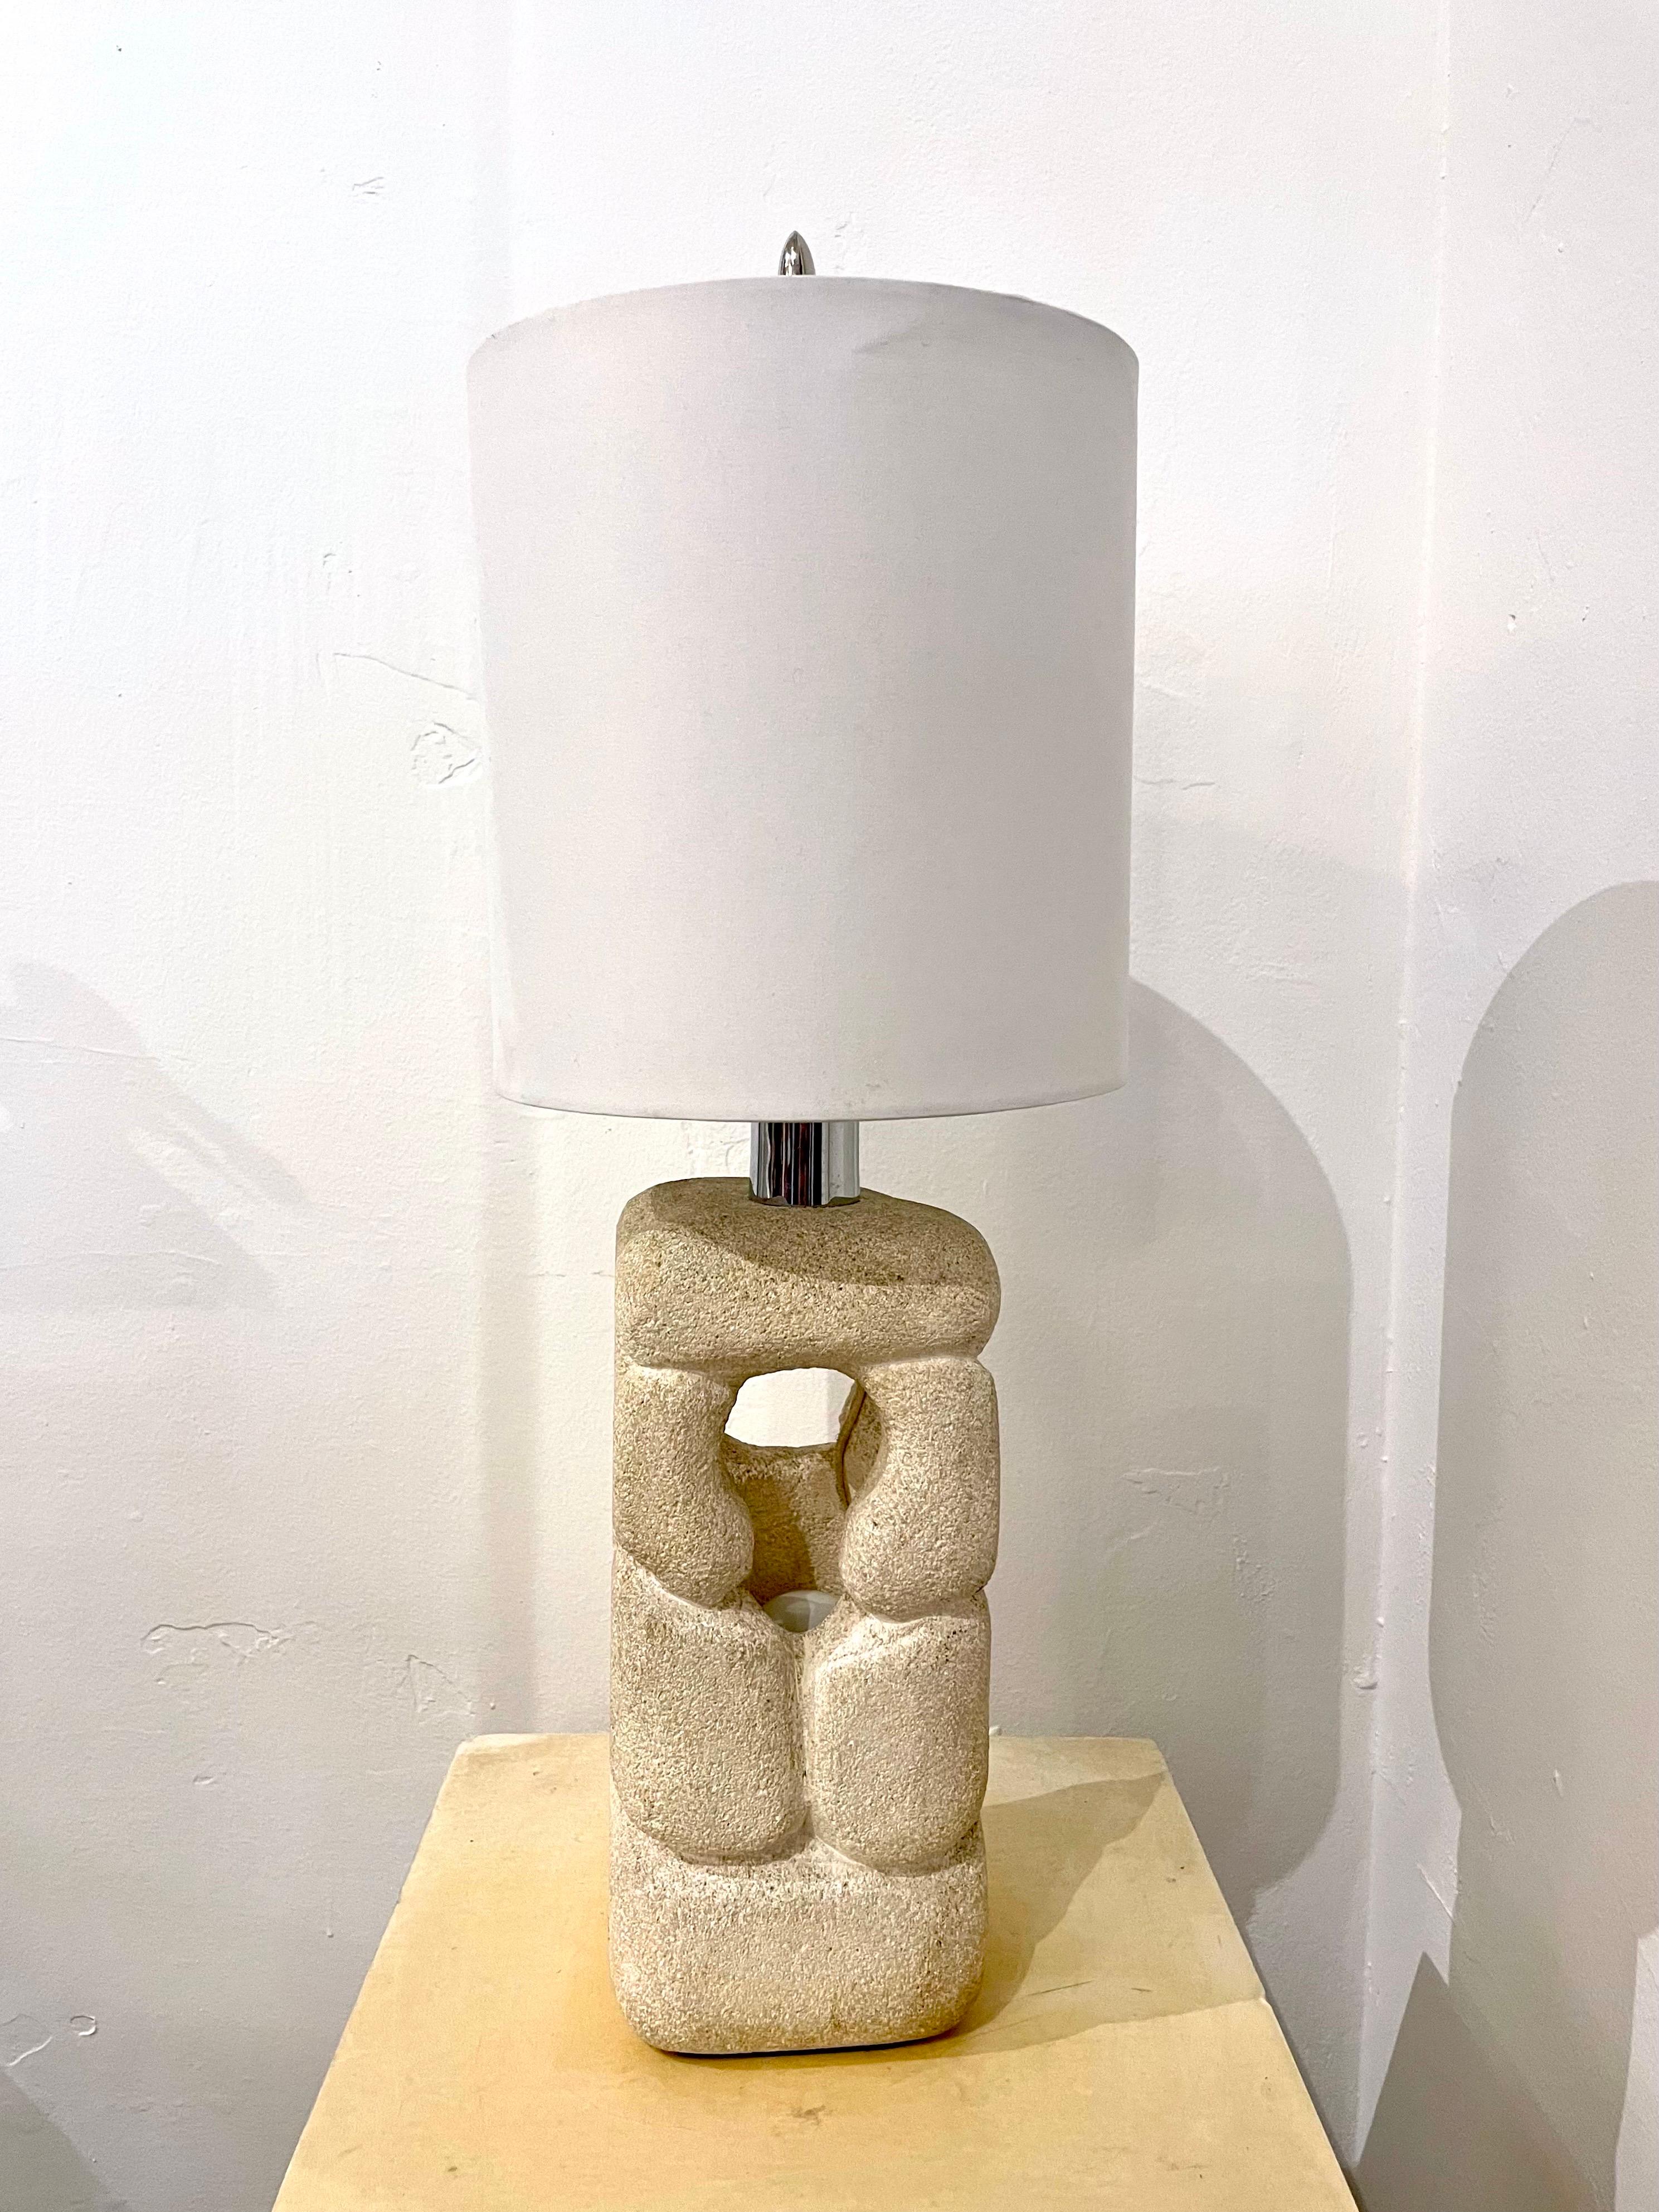 This highly sculptural carved limestone lamp with two light sources (one embedded and one up-light with harp), is organic and abstract in its design. Newly wired with silk cable and switch.

Note: Stone portion alone is 10.5 inches tall, 5 x 5